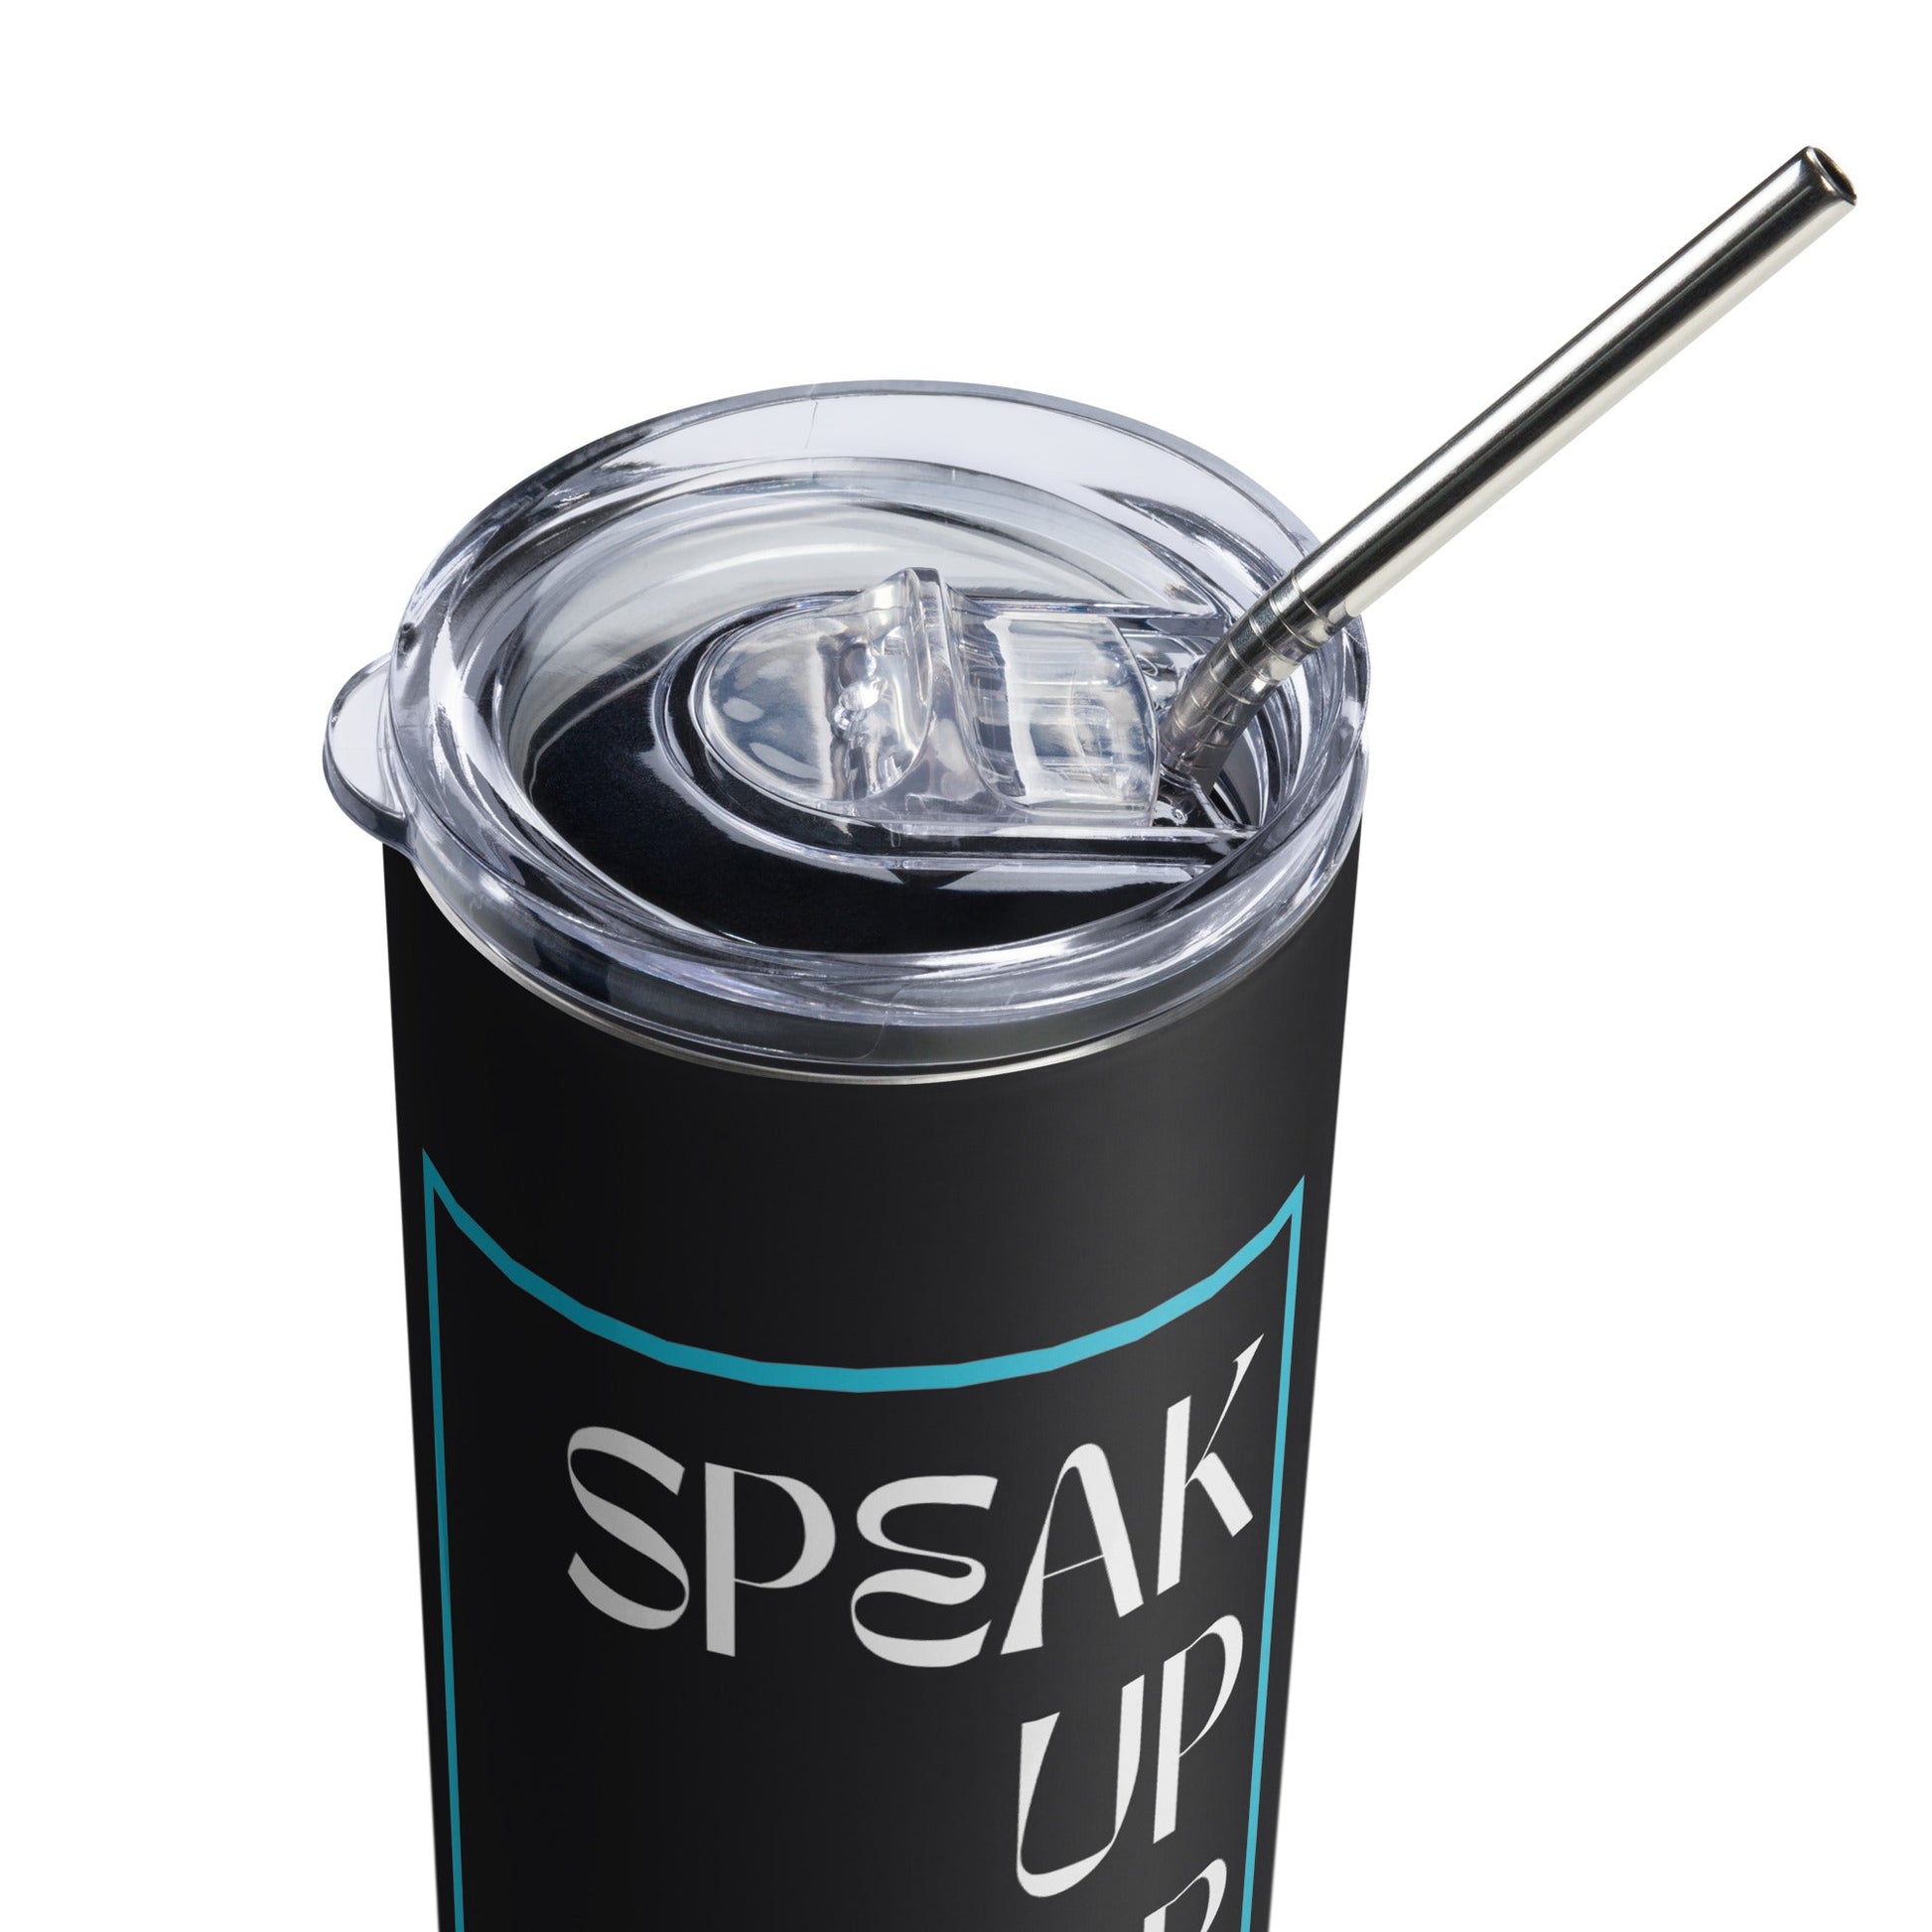 Speak Up for Others Speech Bubble Stainless steel tumbler-recalciGrant